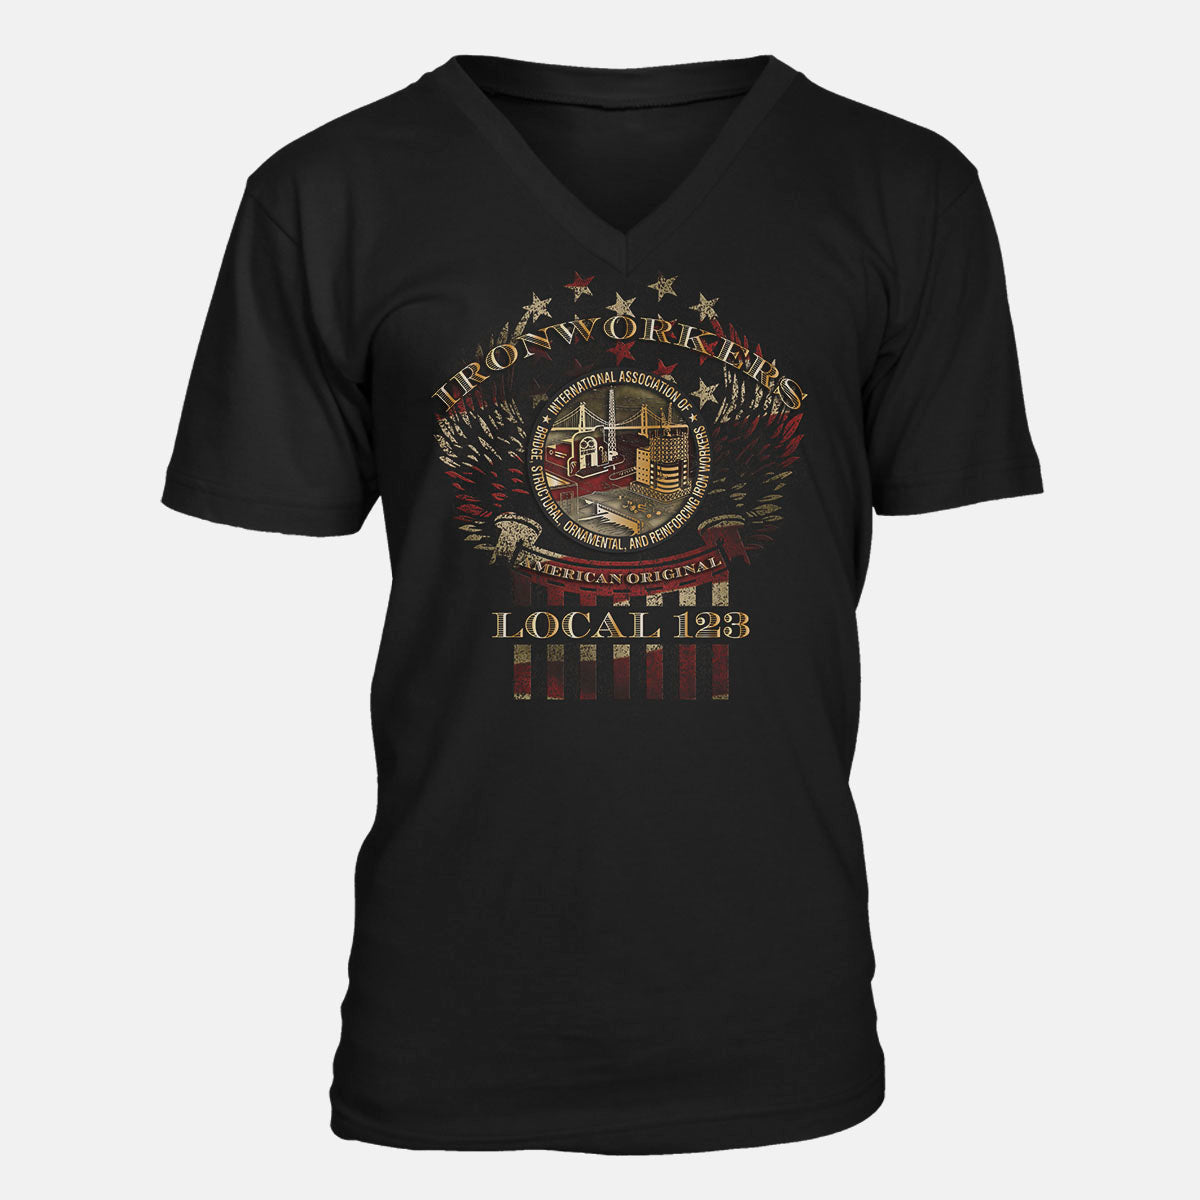 Ironworkers Winged Eagle Apparel